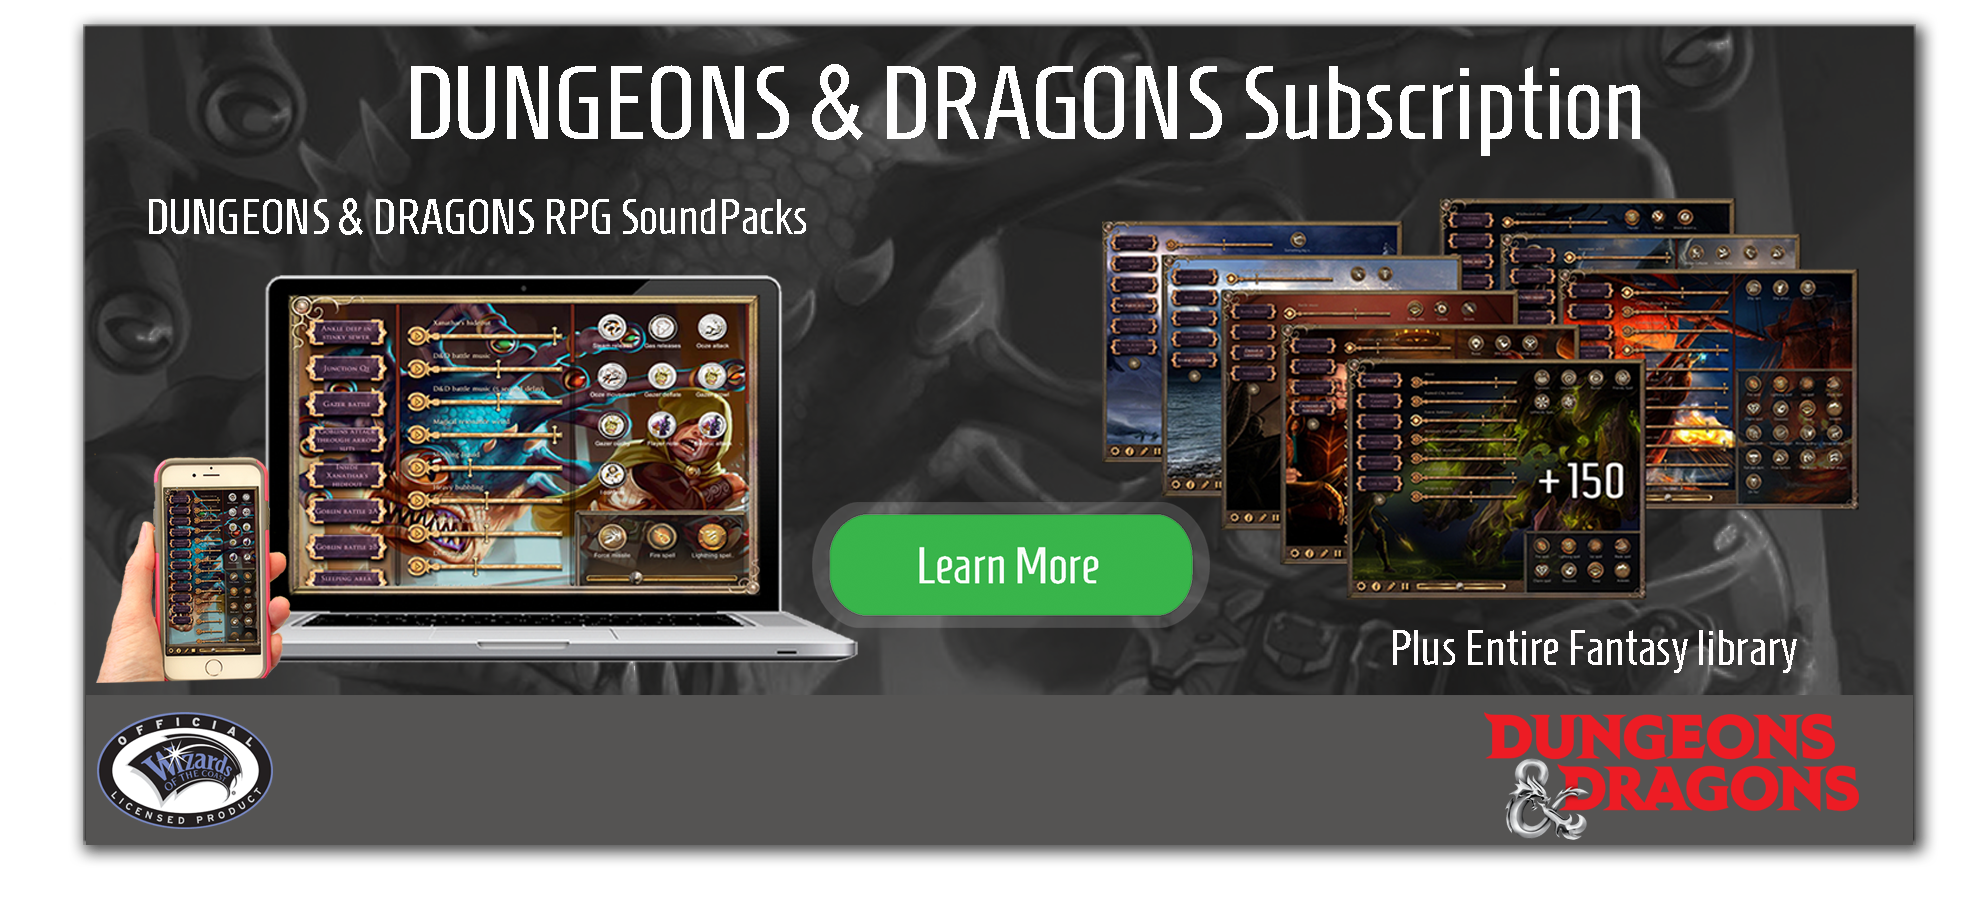 Dungeons & Dragons sounds to the max - get a subscription